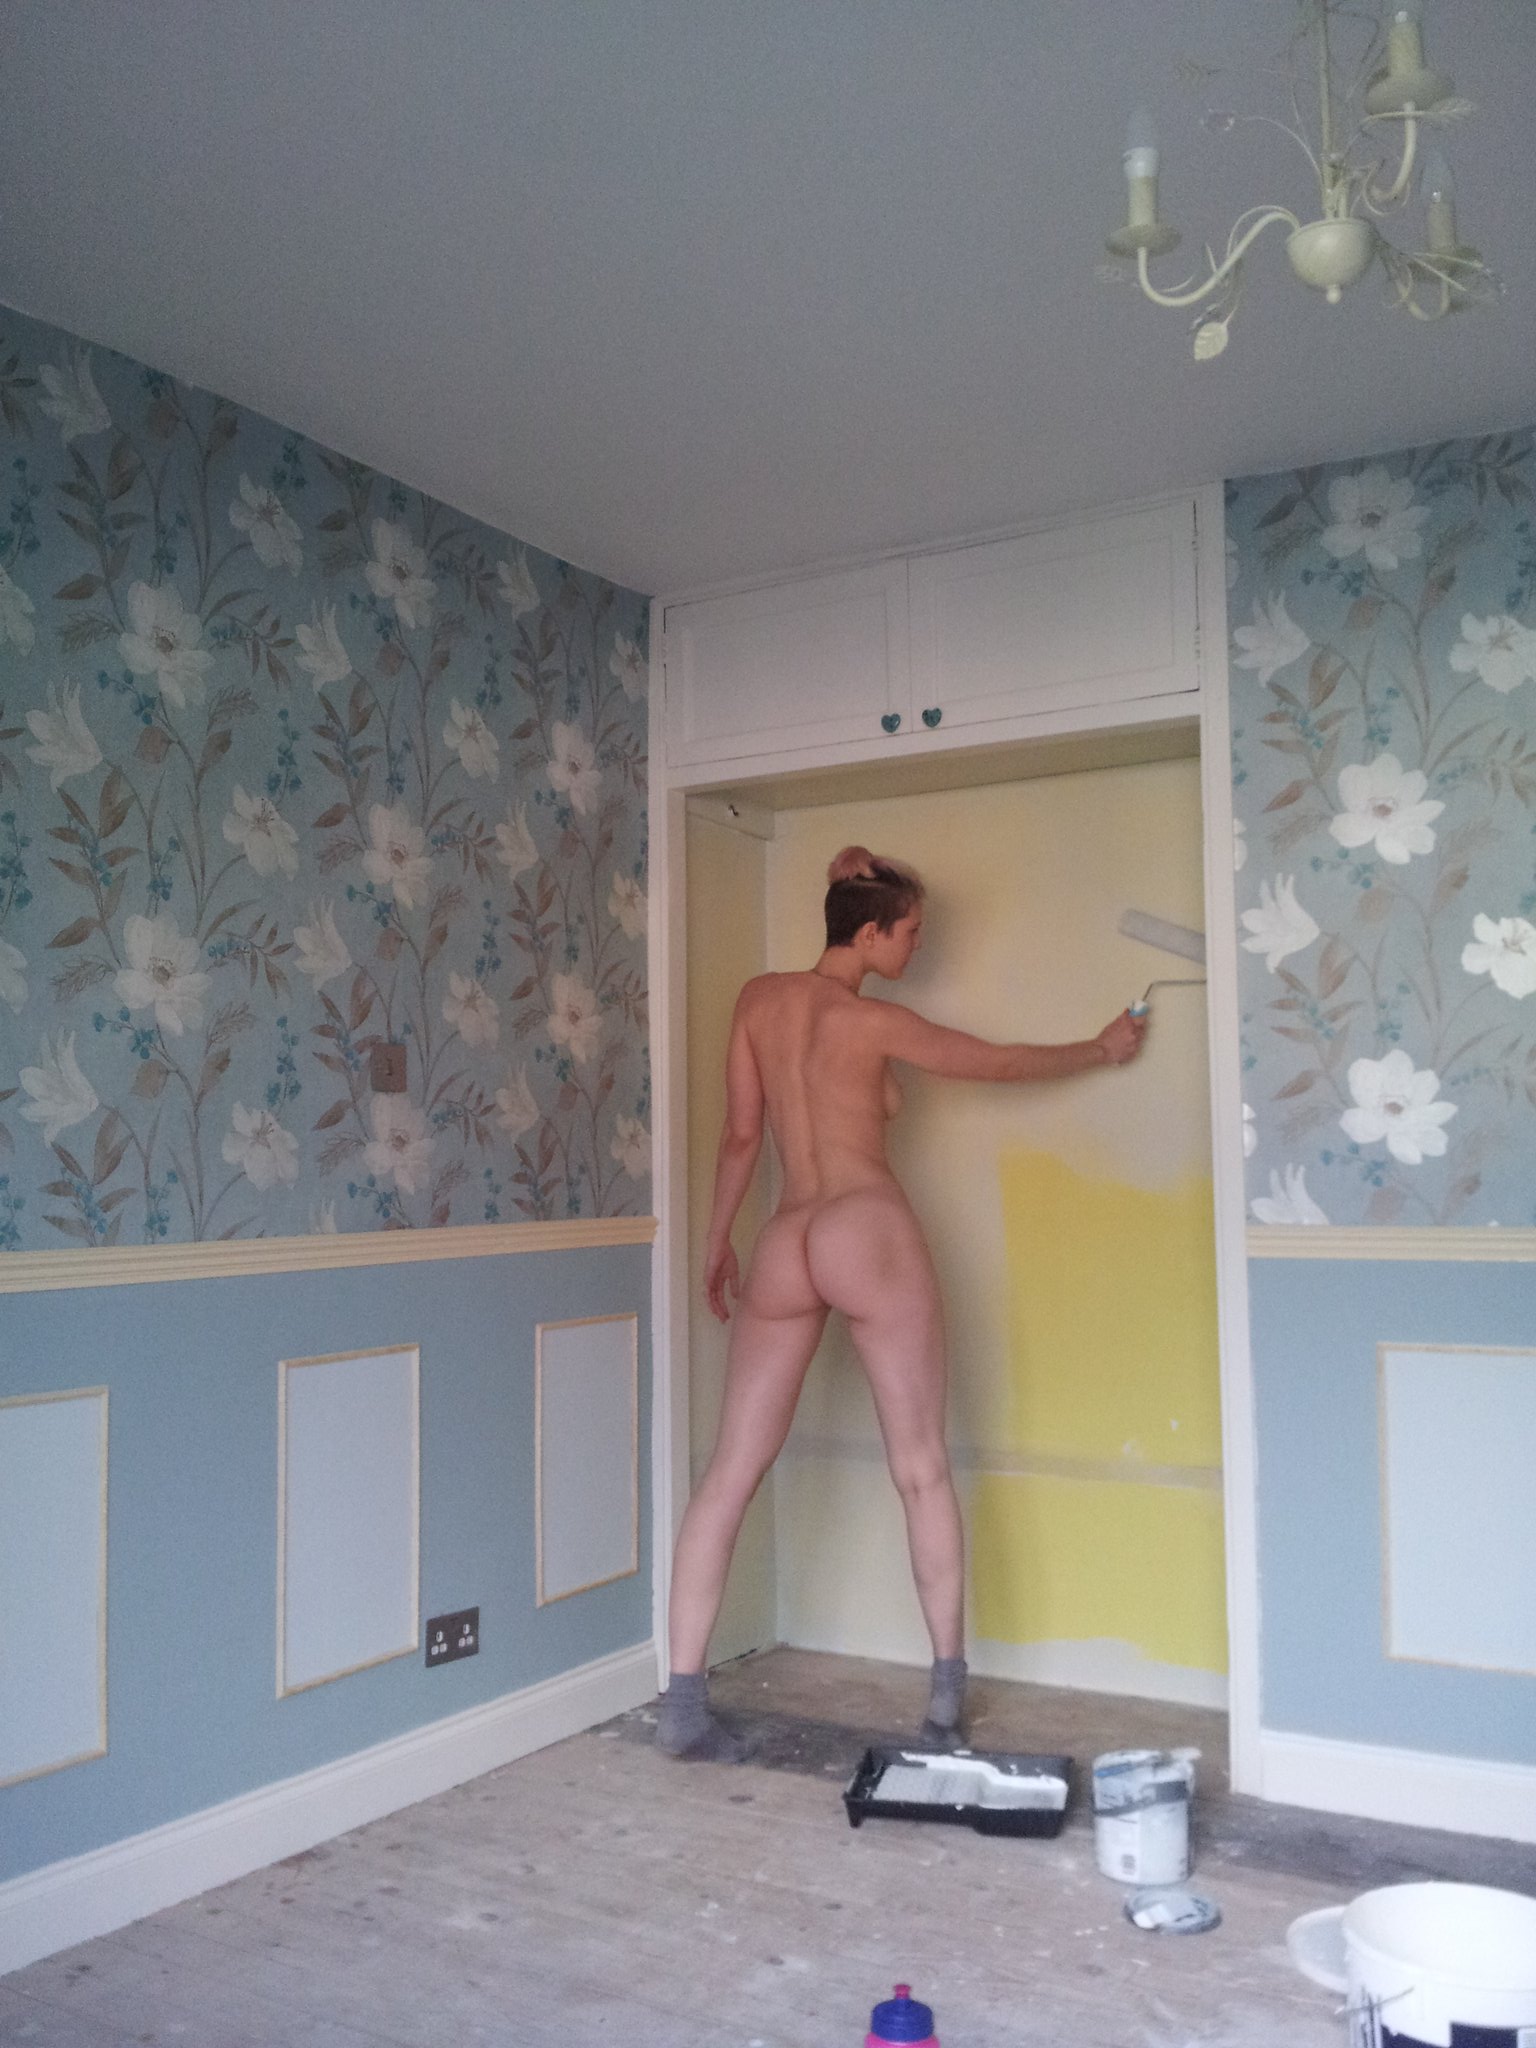 2 pic. Finishing touches #DIY #PAINTING @RateMyAss1 @AssGods @FitAsFuckGirls @PhotoSexGirl @TeamCamgirls